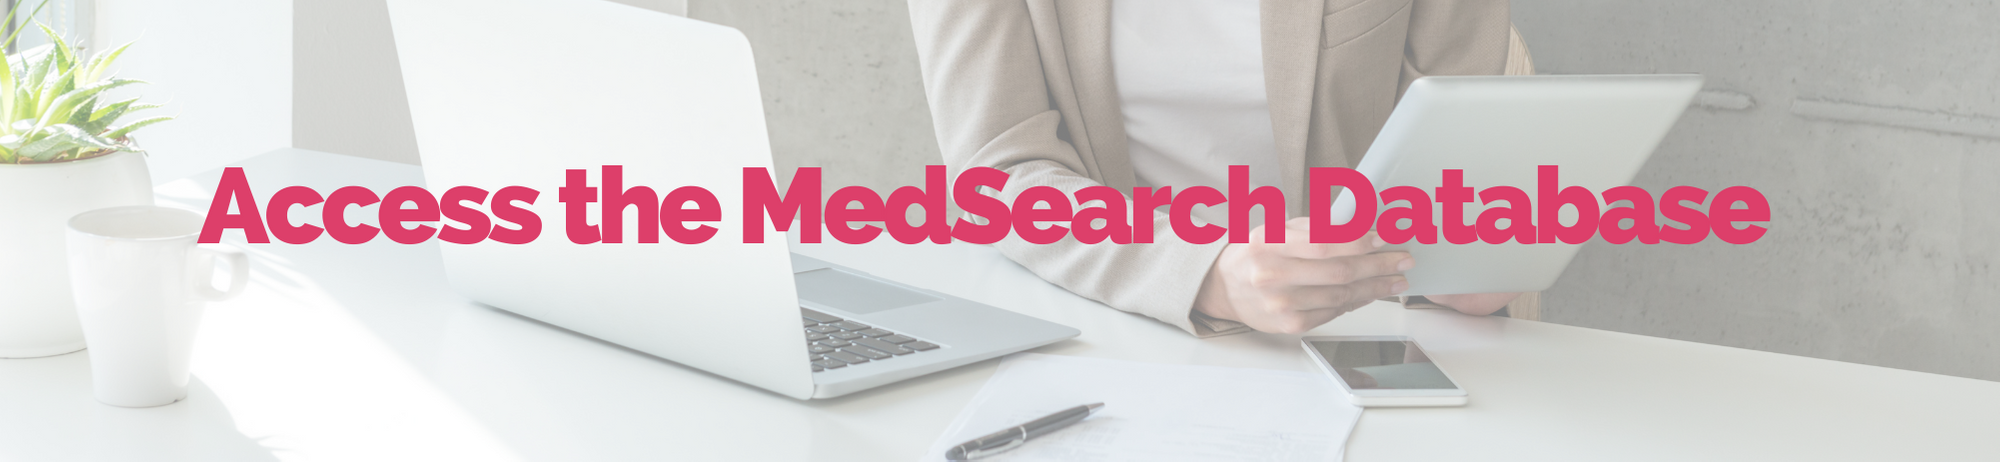 Access MedSearch